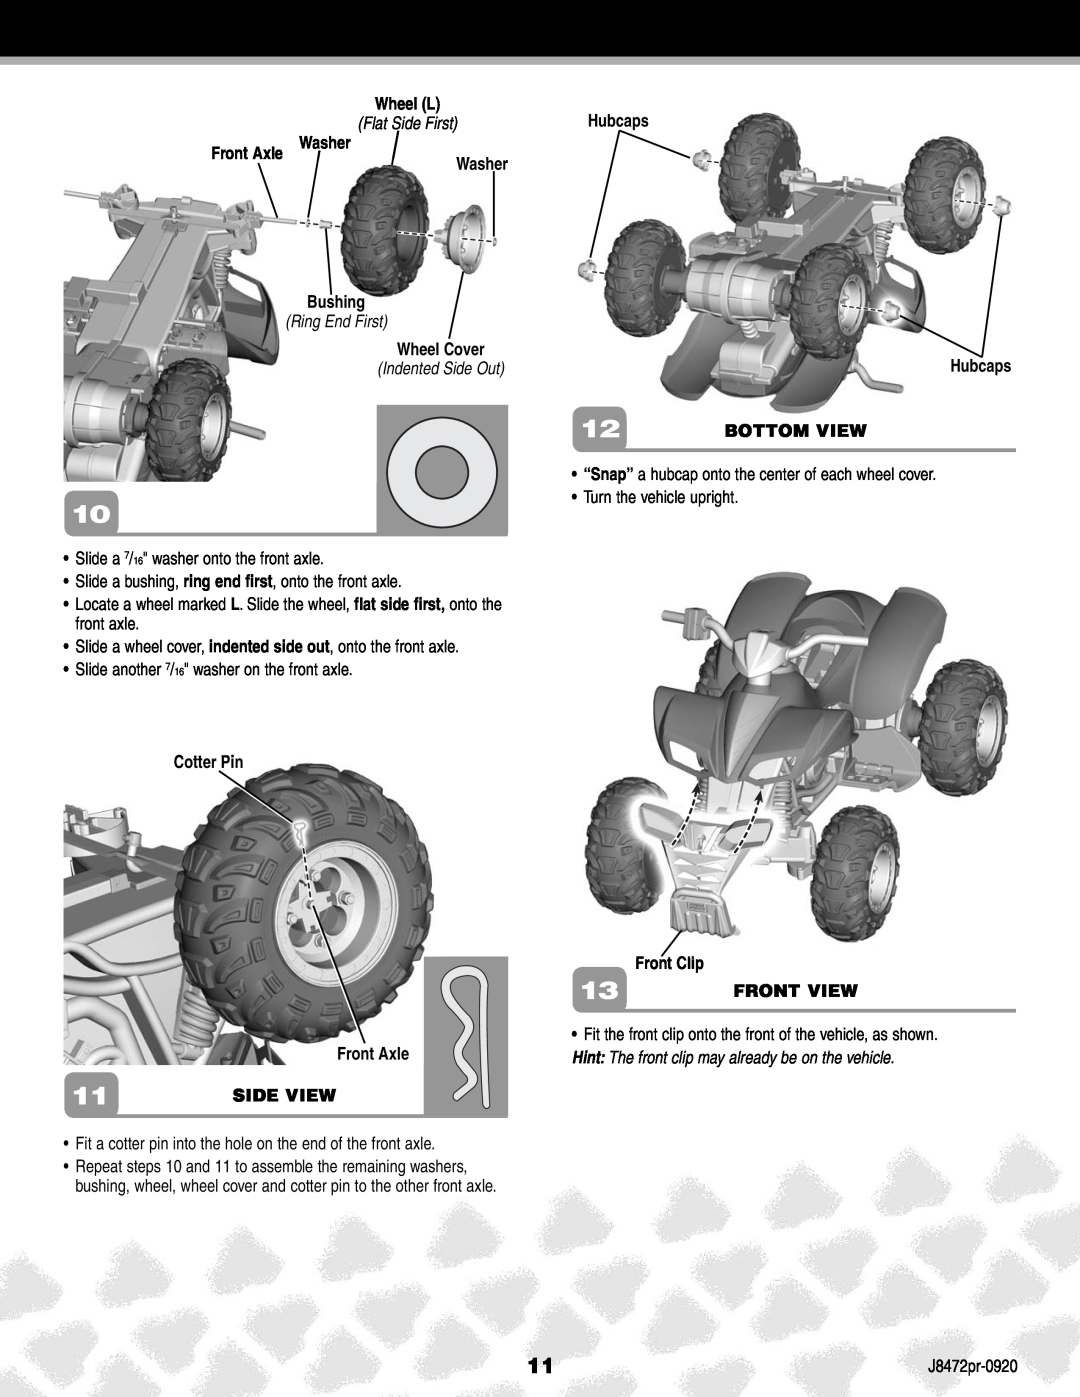 Kawasaki J8472 Wheel L, Flat Side First, Washer Front Axle Washer Bushing, Ring End First, Wheel Cover, Indented Side Out 